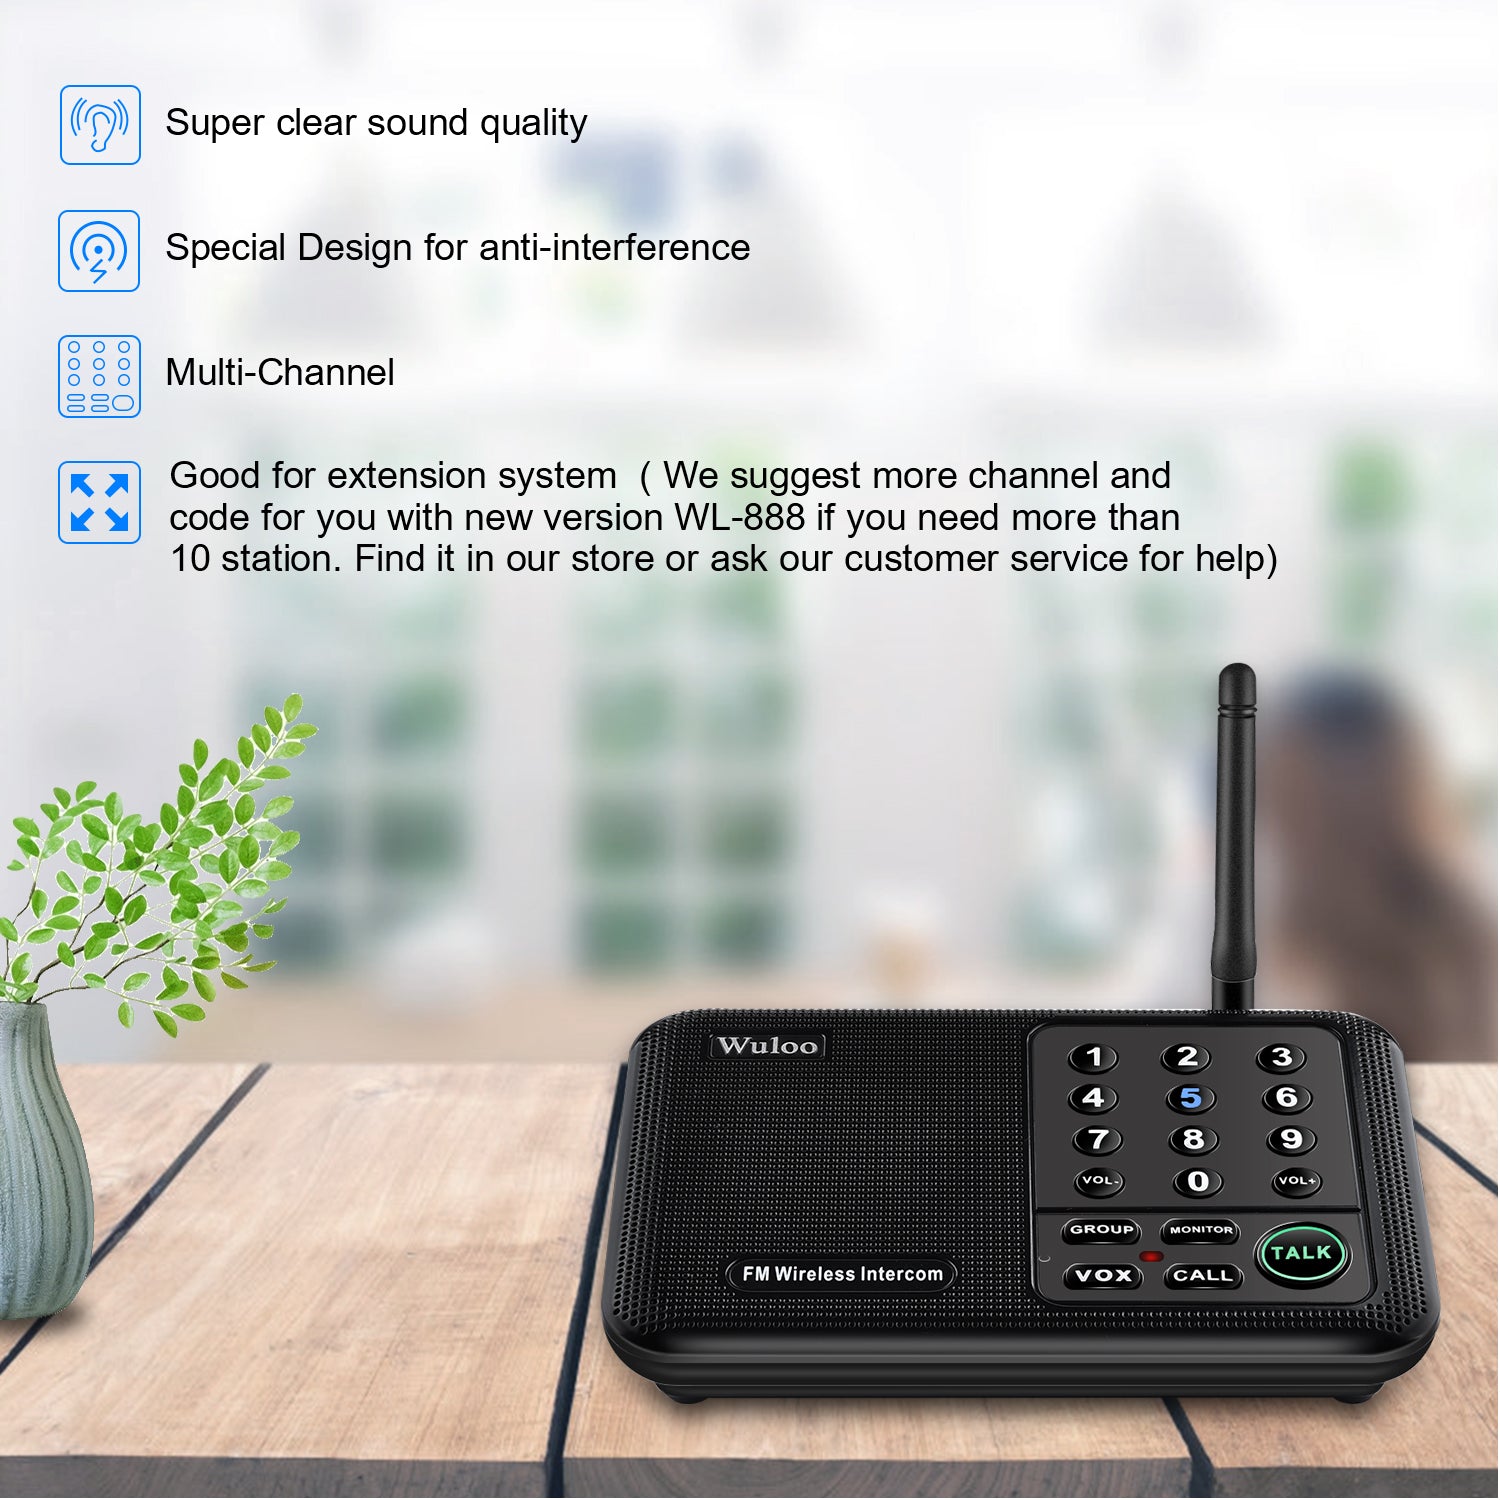 Hands-Free Two Way Intercoms Wireless for Home Business, Wuloo Upgrade  Audio Intercom System for Elderly, Full Duplex Room to Room Intercom with  5280